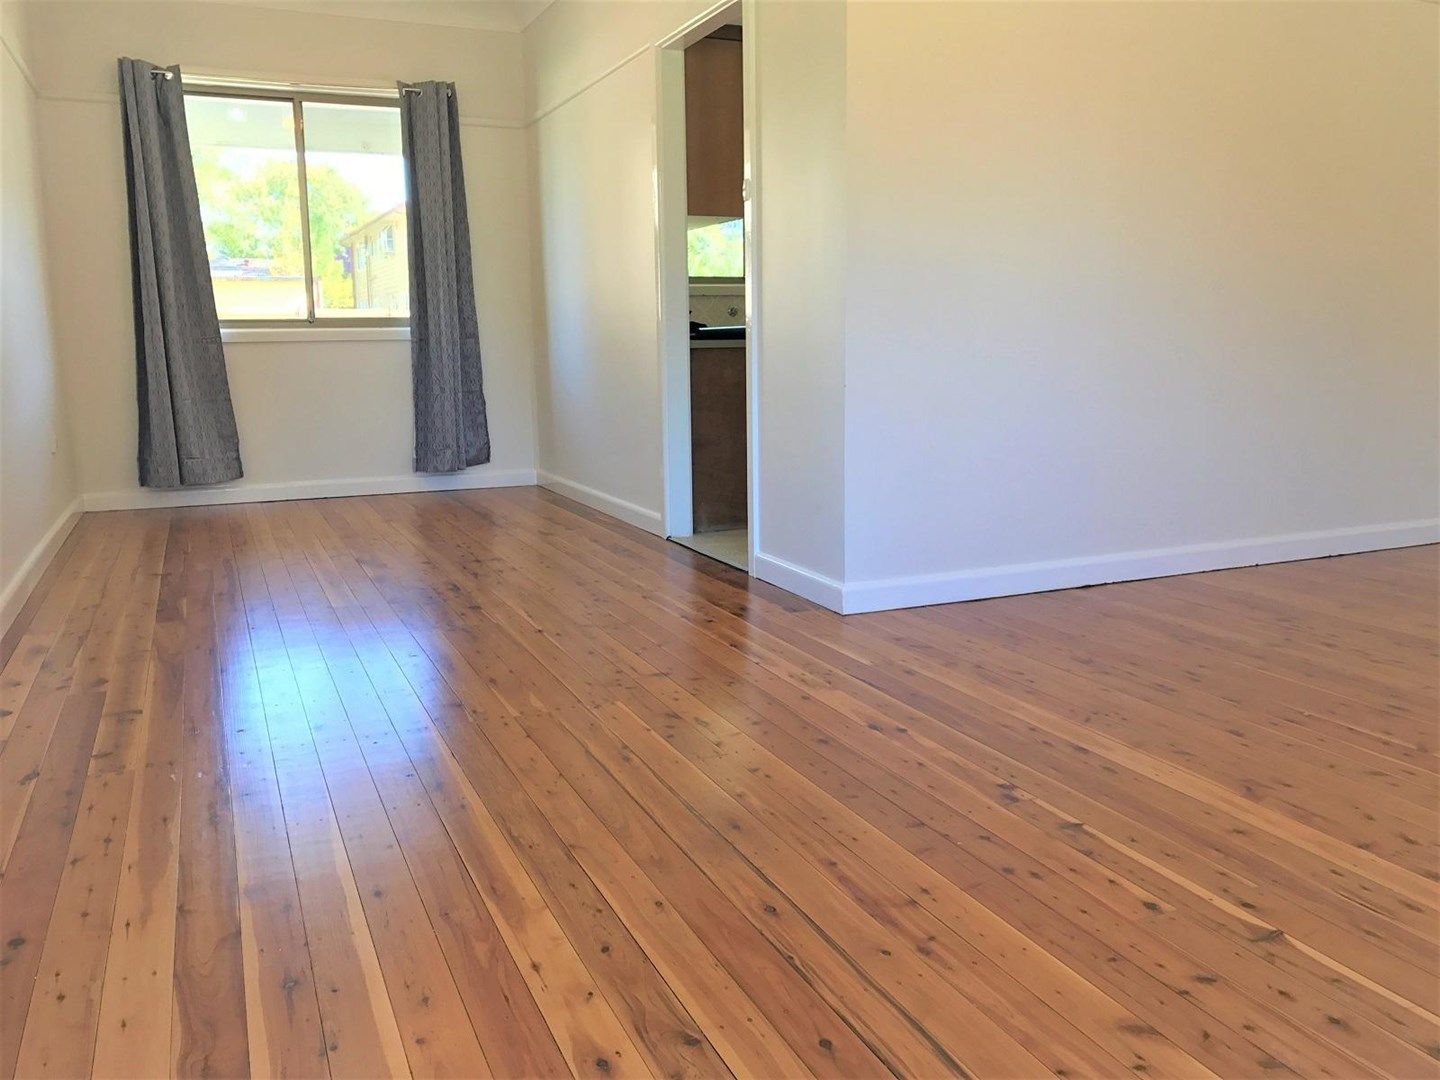 15 Galston Road, Hornsby NSW 2077, Image 2